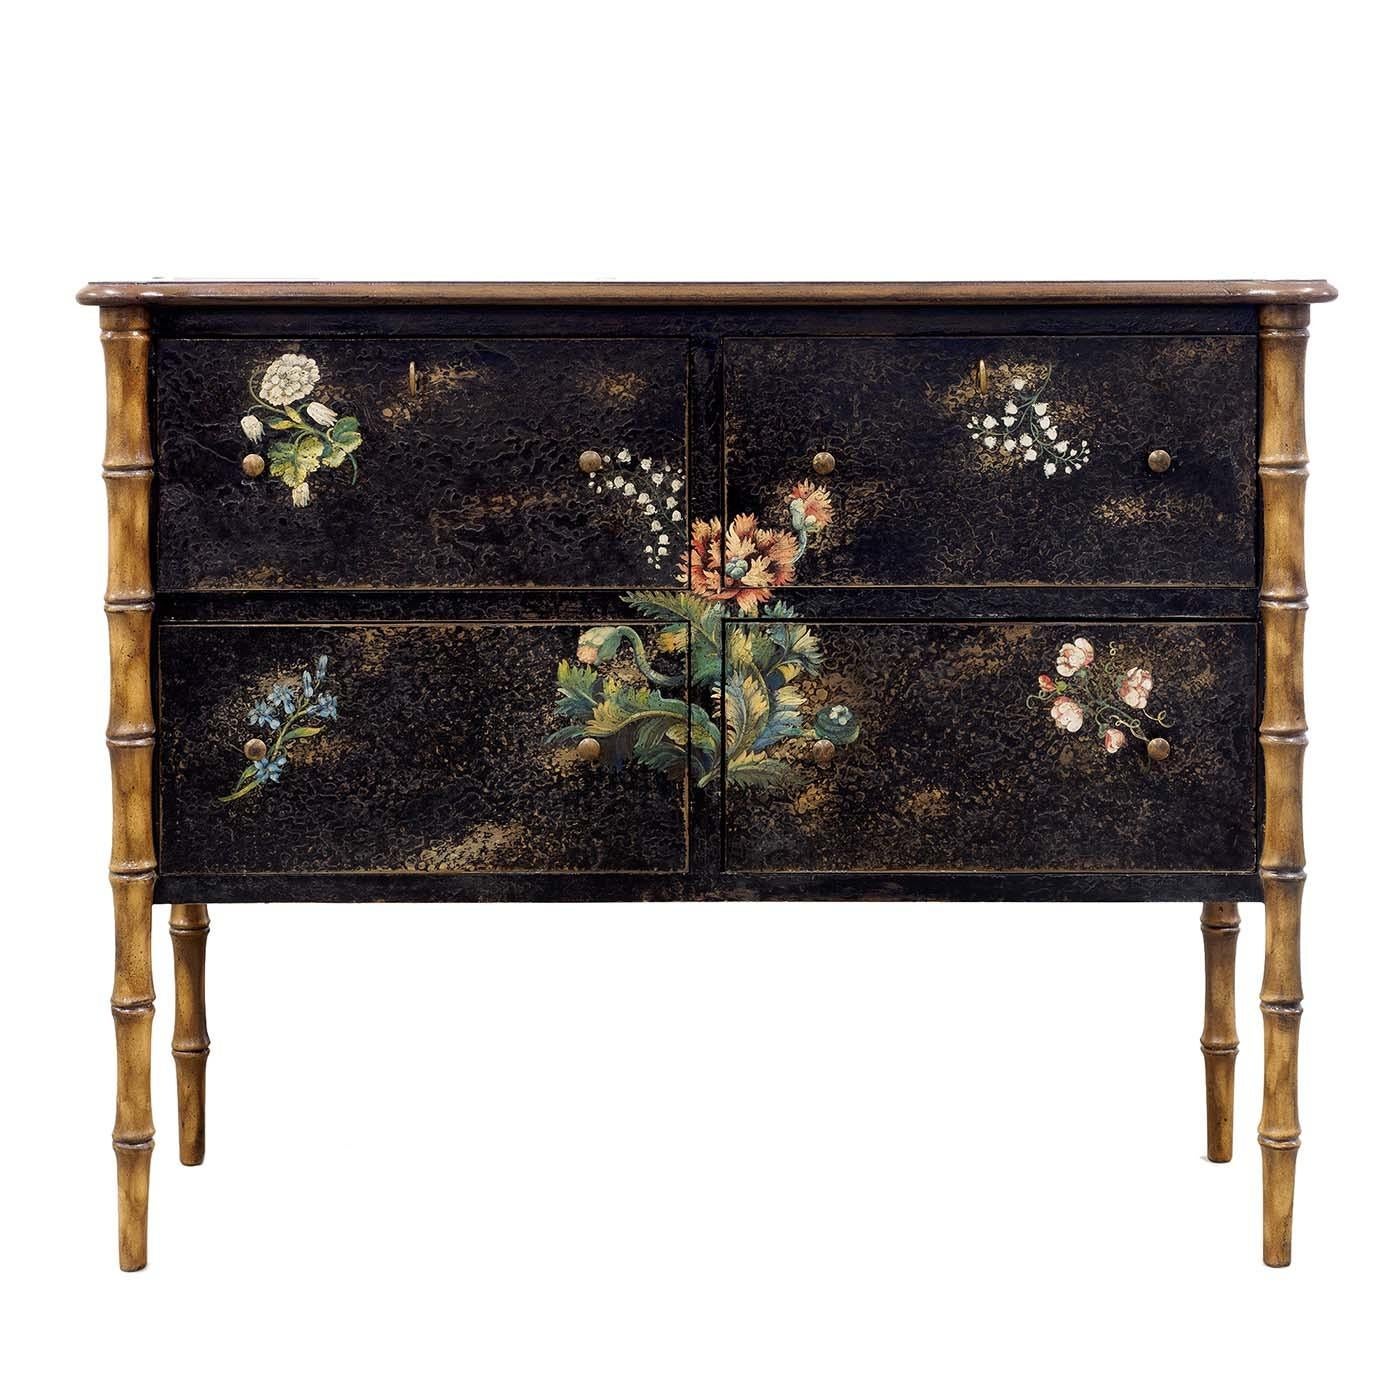 The elegant Venetian style characterizes the Lombardy bedside table, custom-made and decorated entirely by hand. The wooden structure, shown here in black with decorations in soft shades, can be customized both in size and color, based on customer's